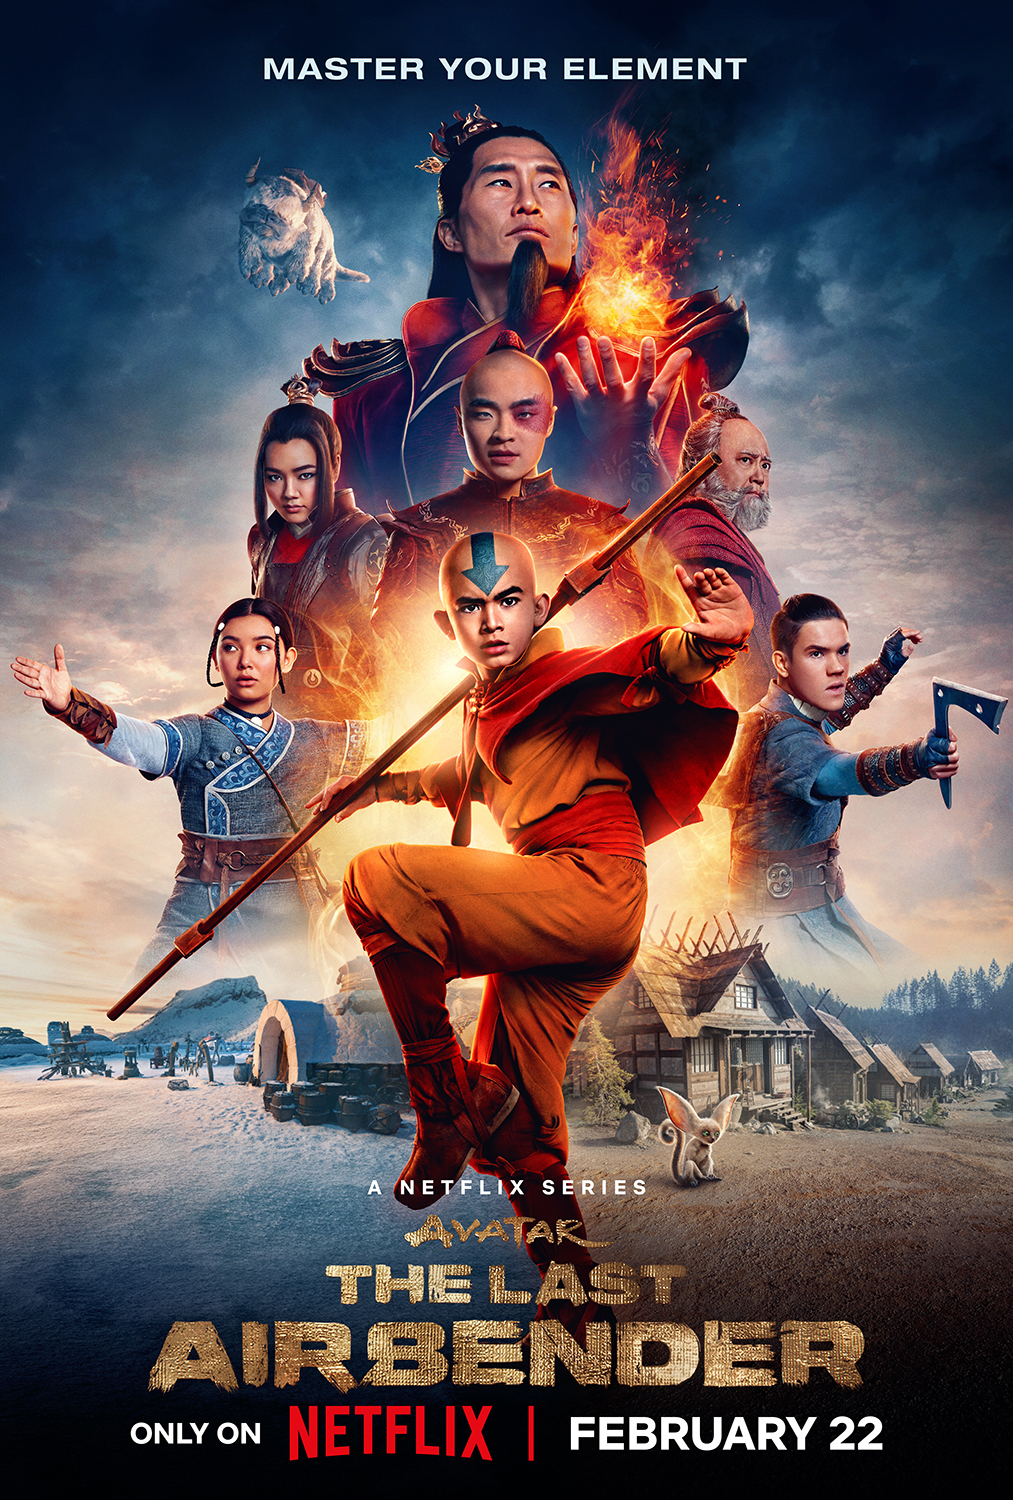 Avatar: The Last Airbender Key Art and Trailer Images